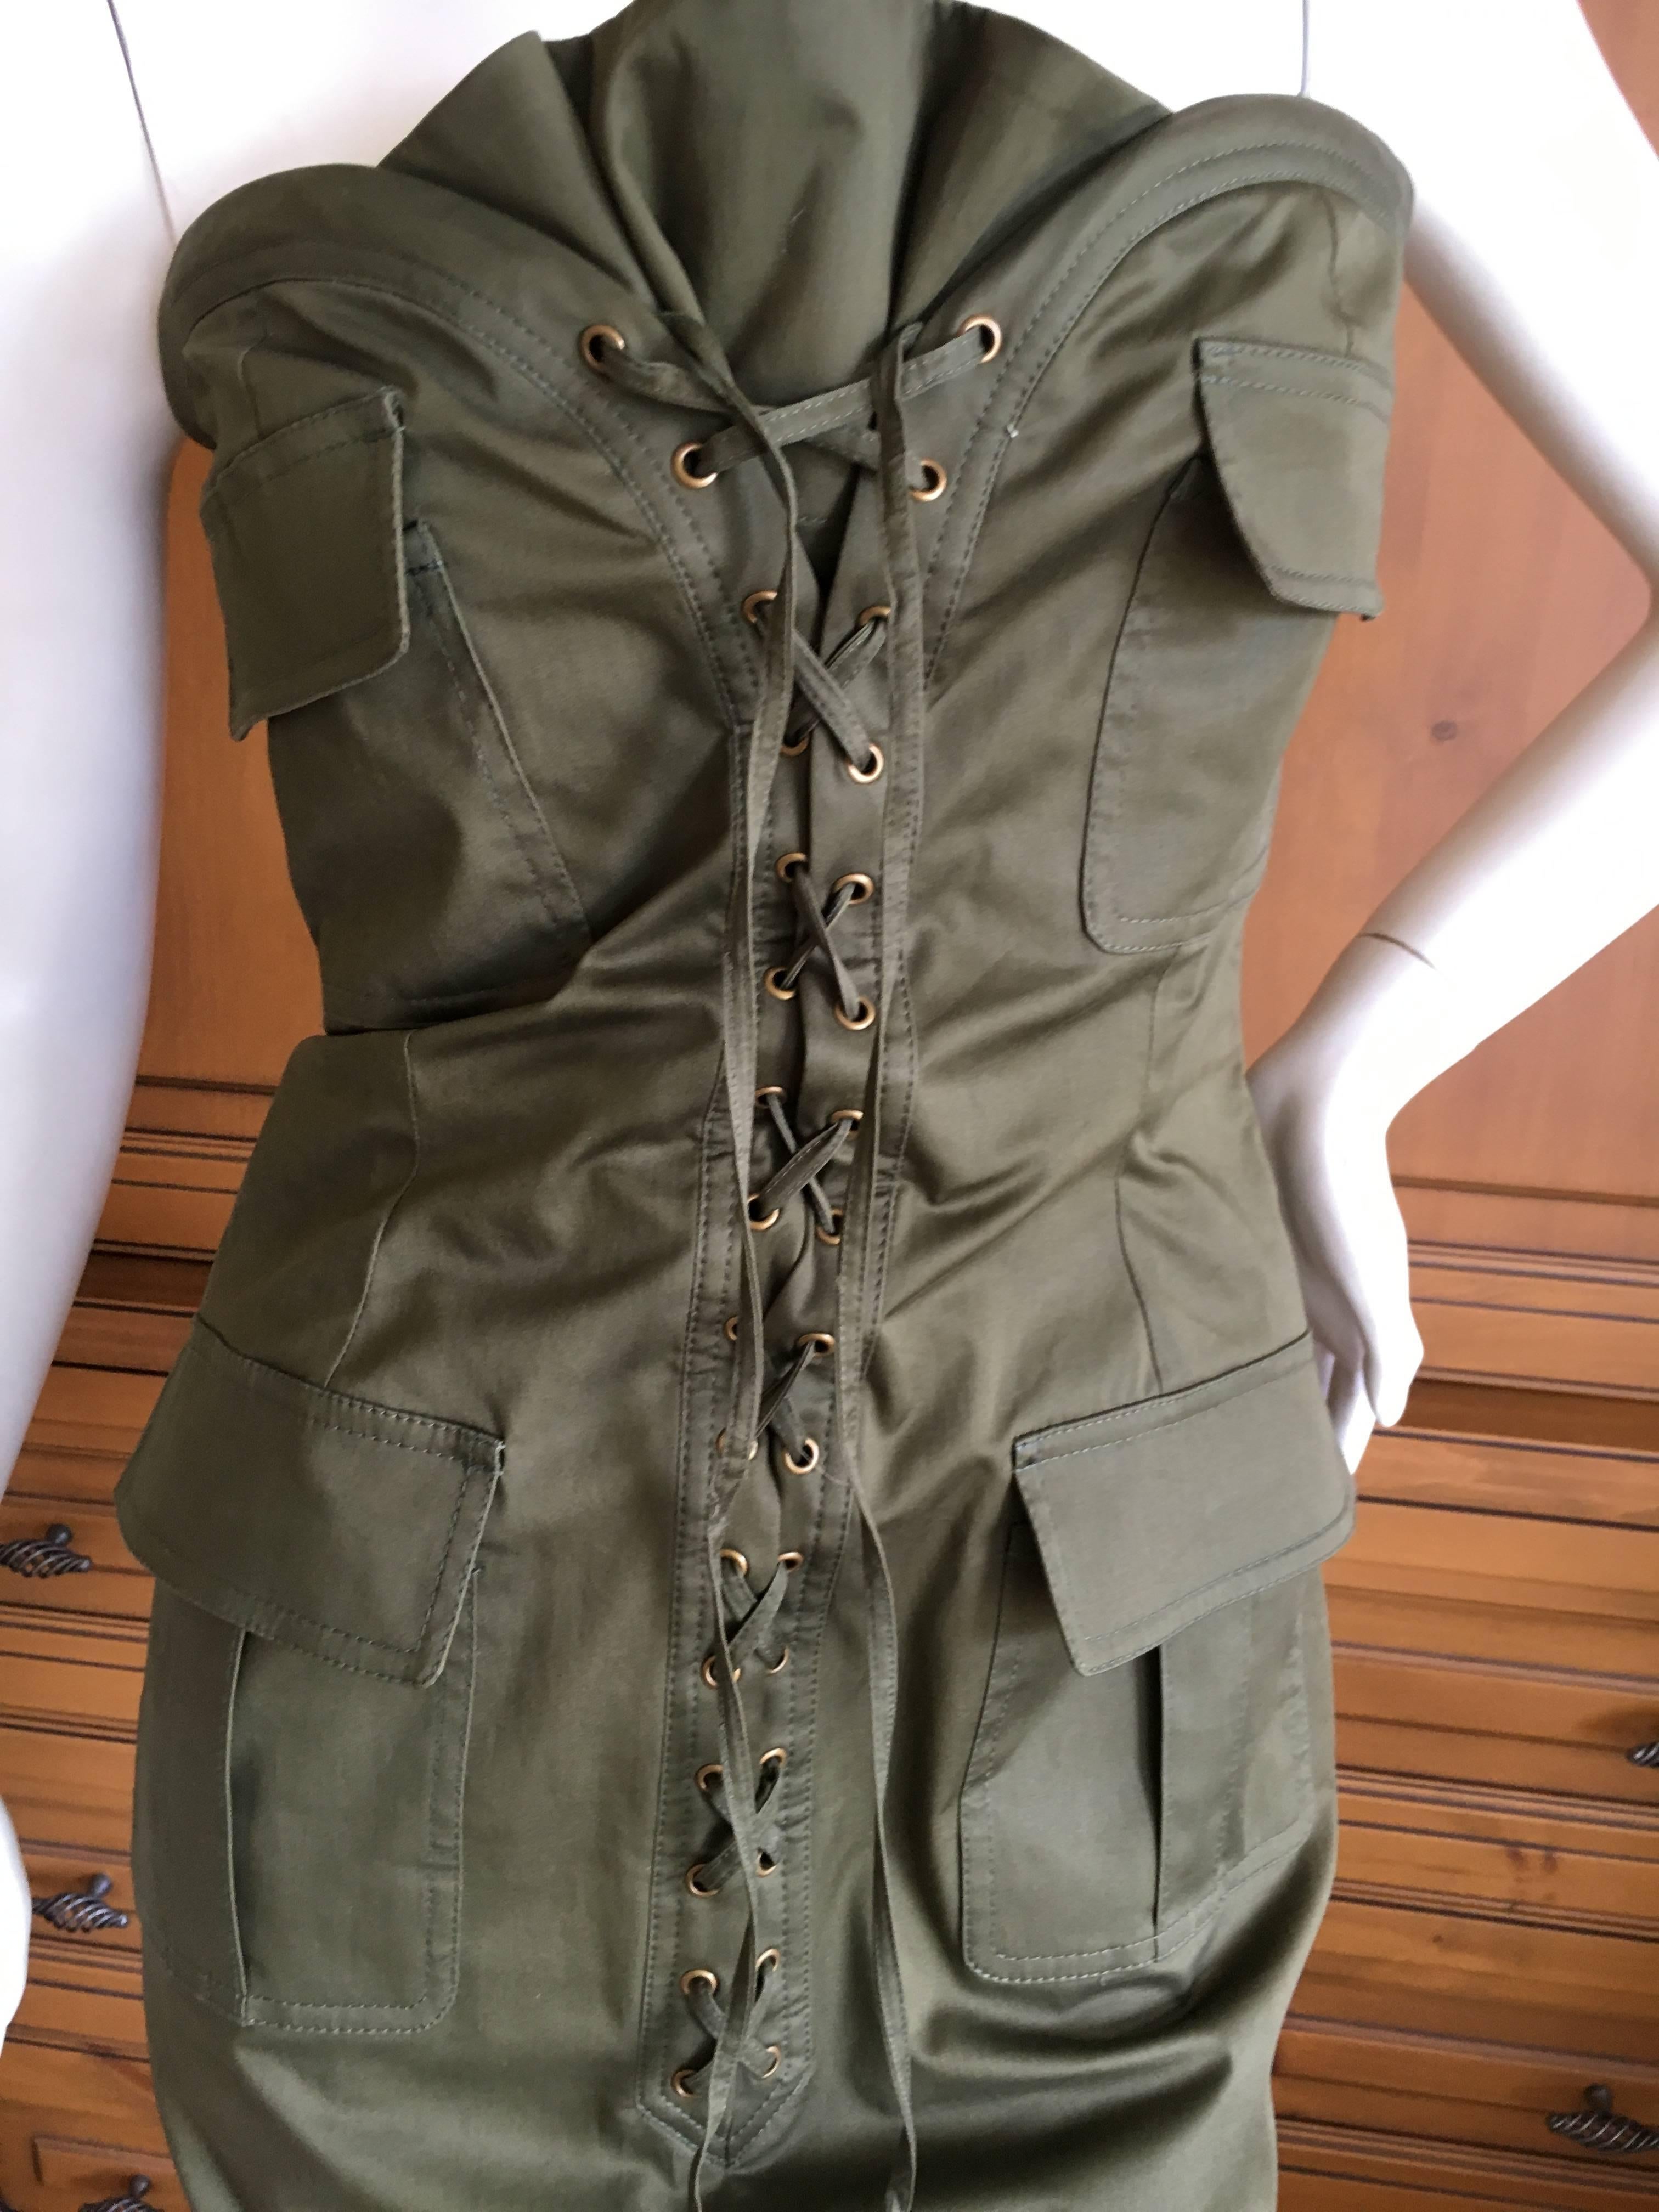 Yves Saint Laurent by Tom Ford Strapless Safari Dress with Corset Lacing For Sale 4